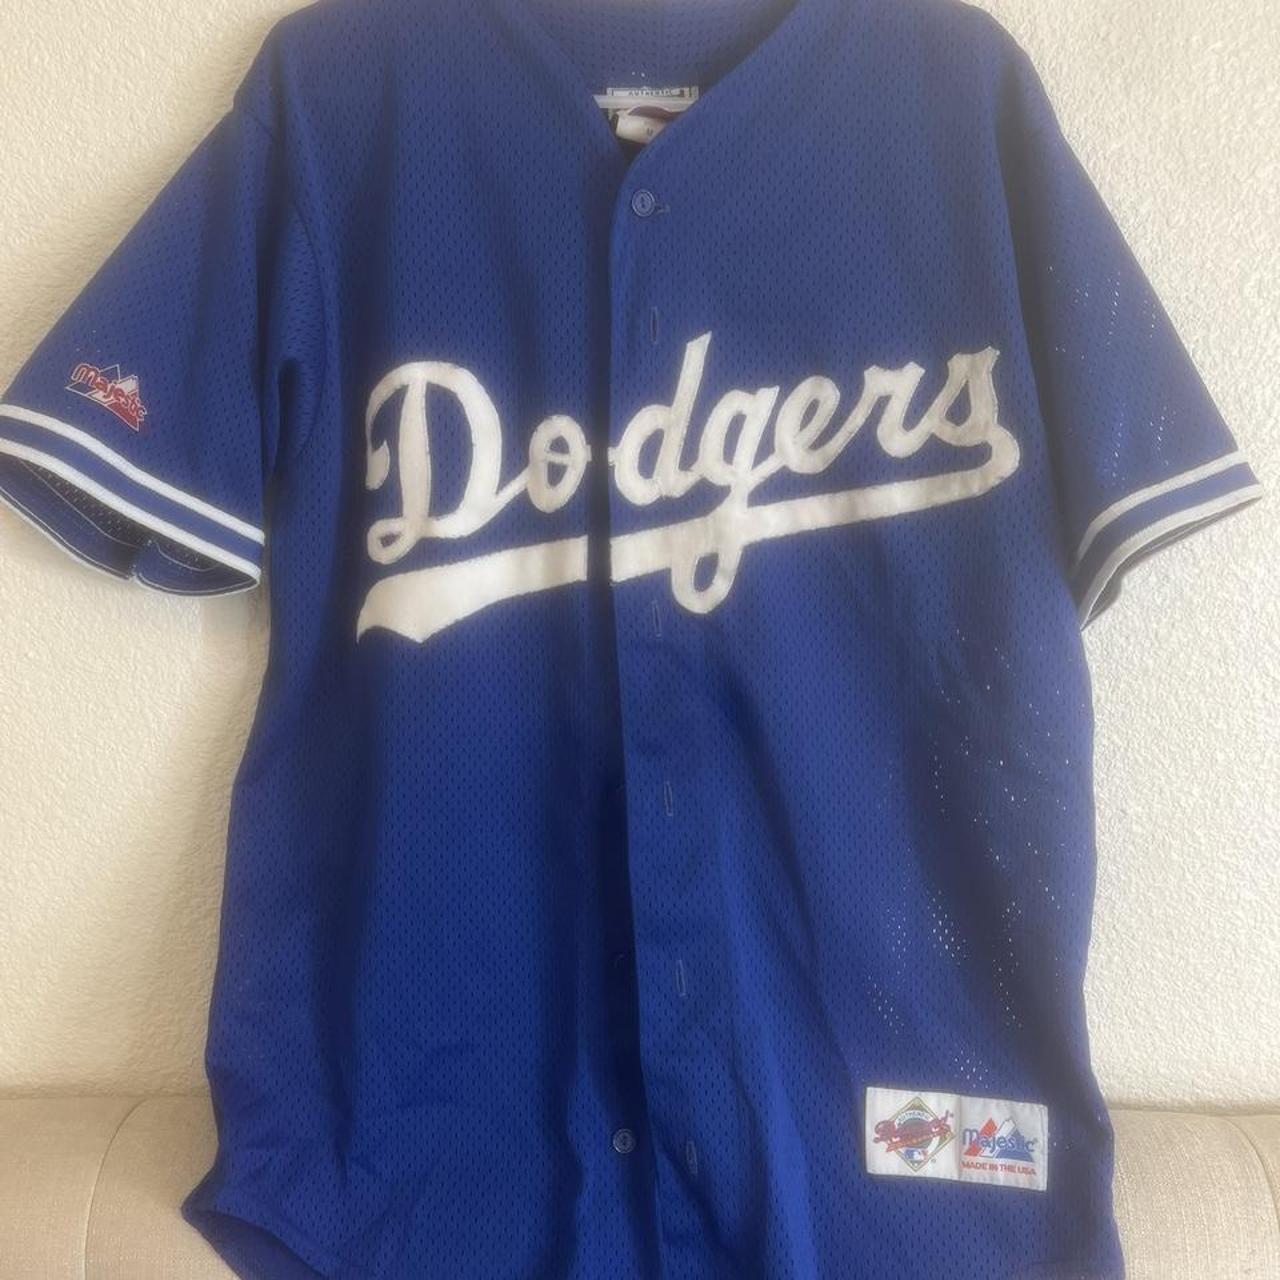 L.A. Dodgers Jerseys, Signed Jerseys, Dodgers Collectible Jerseys